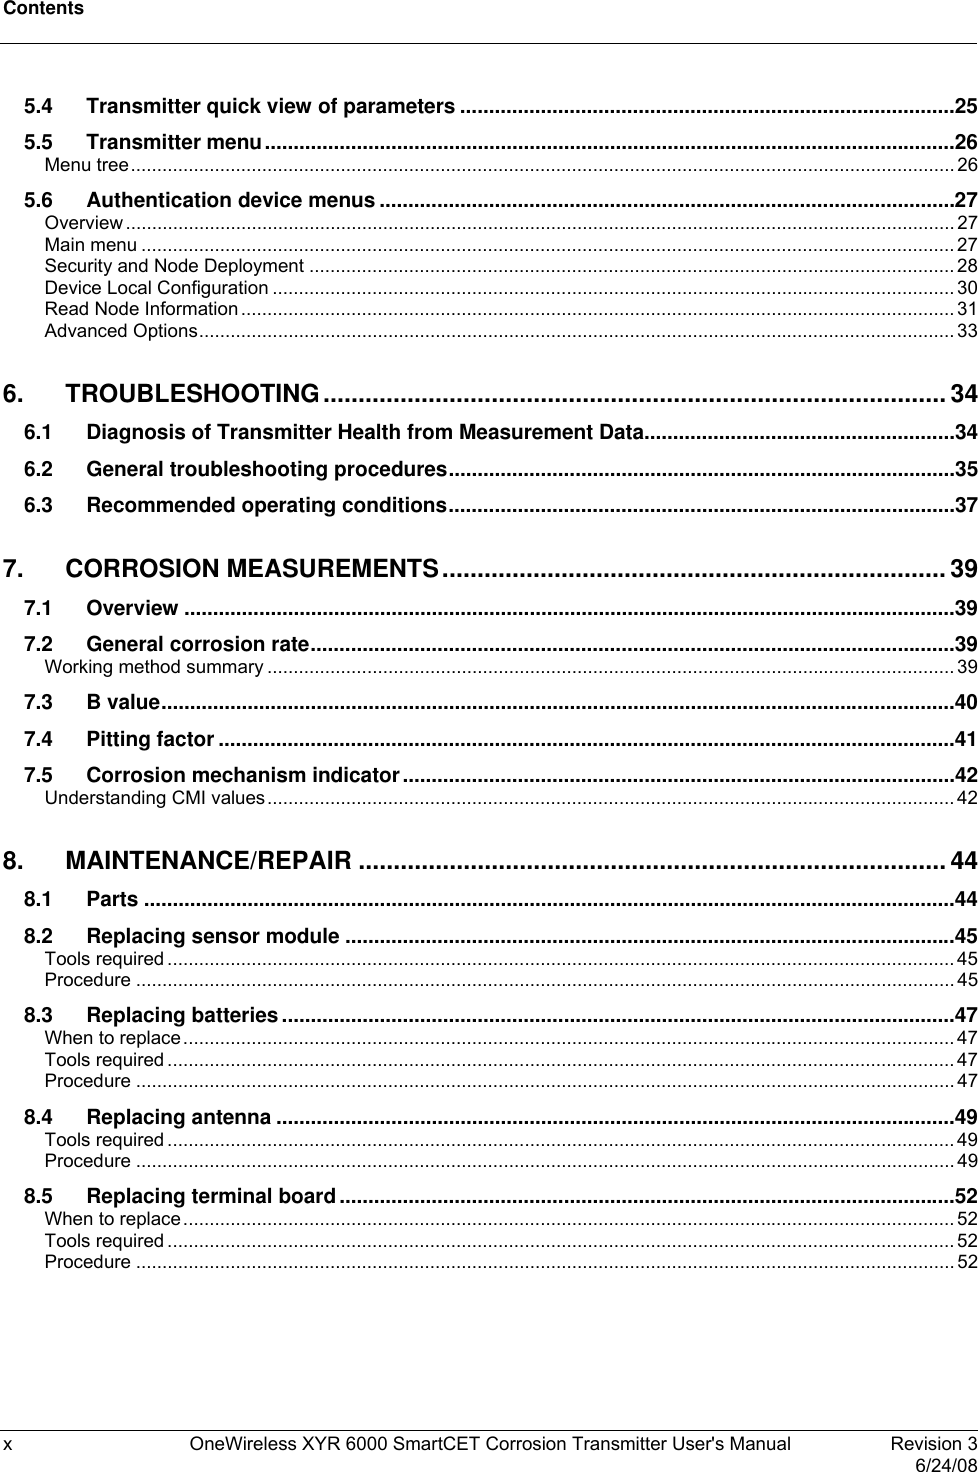 Contents  x  OneWireless XYR 6000 SmartCET Corrosion Transmitter User&apos;s Manual   Revision 3   6/24/08 5.4 Transmitter quick view of parameters ......................................................................................25 5.5 Transmitter menu........................................................................................................................26 Menu tree.............................................................................................................................................................26 5.6 Authentication device menus ....................................................................................................27 Overview..............................................................................................................................................................27 Main menu ...........................................................................................................................................................27 Security and Node Deployment ........................................................................................................................... 28 Device Local Configuration ..................................................................................................................................30 Read Node Information........................................................................................................................................31 Advanced Options................................................................................................................................................33 6. TROUBLESHOOTING......................................................................................... 34 6.1 Diagnosis of Transmitter Health from Measurement Data......................................................34 6.2 General troubleshooting procedures........................................................................................35 6.3 Recommended operating conditions........................................................................................37 7. CORROSION MEASUREMENTS........................................................................ 39 7.1 Overview ......................................................................................................................................39 7.2 General corrosion rate................................................................................................................39 Working method summary ...................................................................................................................................39 7.3 B value..........................................................................................................................................40 7.4 Pitting factor ................................................................................................................................41 7.5 Corrosion mechanism indicator................................................................................................42 Understanding CMI values...................................................................................................................................42 8. MAINTENANCE/REPAIR .................................................................................... 44 8.1 Parts .............................................................................................................................................44 8.2 Replacing sensor module ..........................................................................................................45 Tools required ......................................................................................................................................................45 Procedure ............................................................................................................................................................45 8.3 Replacing batteries .....................................................................................................................47 When to replace...................................................................................................................................................47 Tools required ......................................................................................................................................................47 Procedure ............................................................................................................................................................47 8.4 Replacing antenna ......................................................................................................................49 Tools required ......................................................................................................................................................49 Procedure ............................................................................................................................................................49 8.5 Replacing terminal board...........................................................................................................52 When to replace...................................................................................................................................................52 Tools required ......................................................................................................................................................52 Procedure ............................................................................................................................................................52  